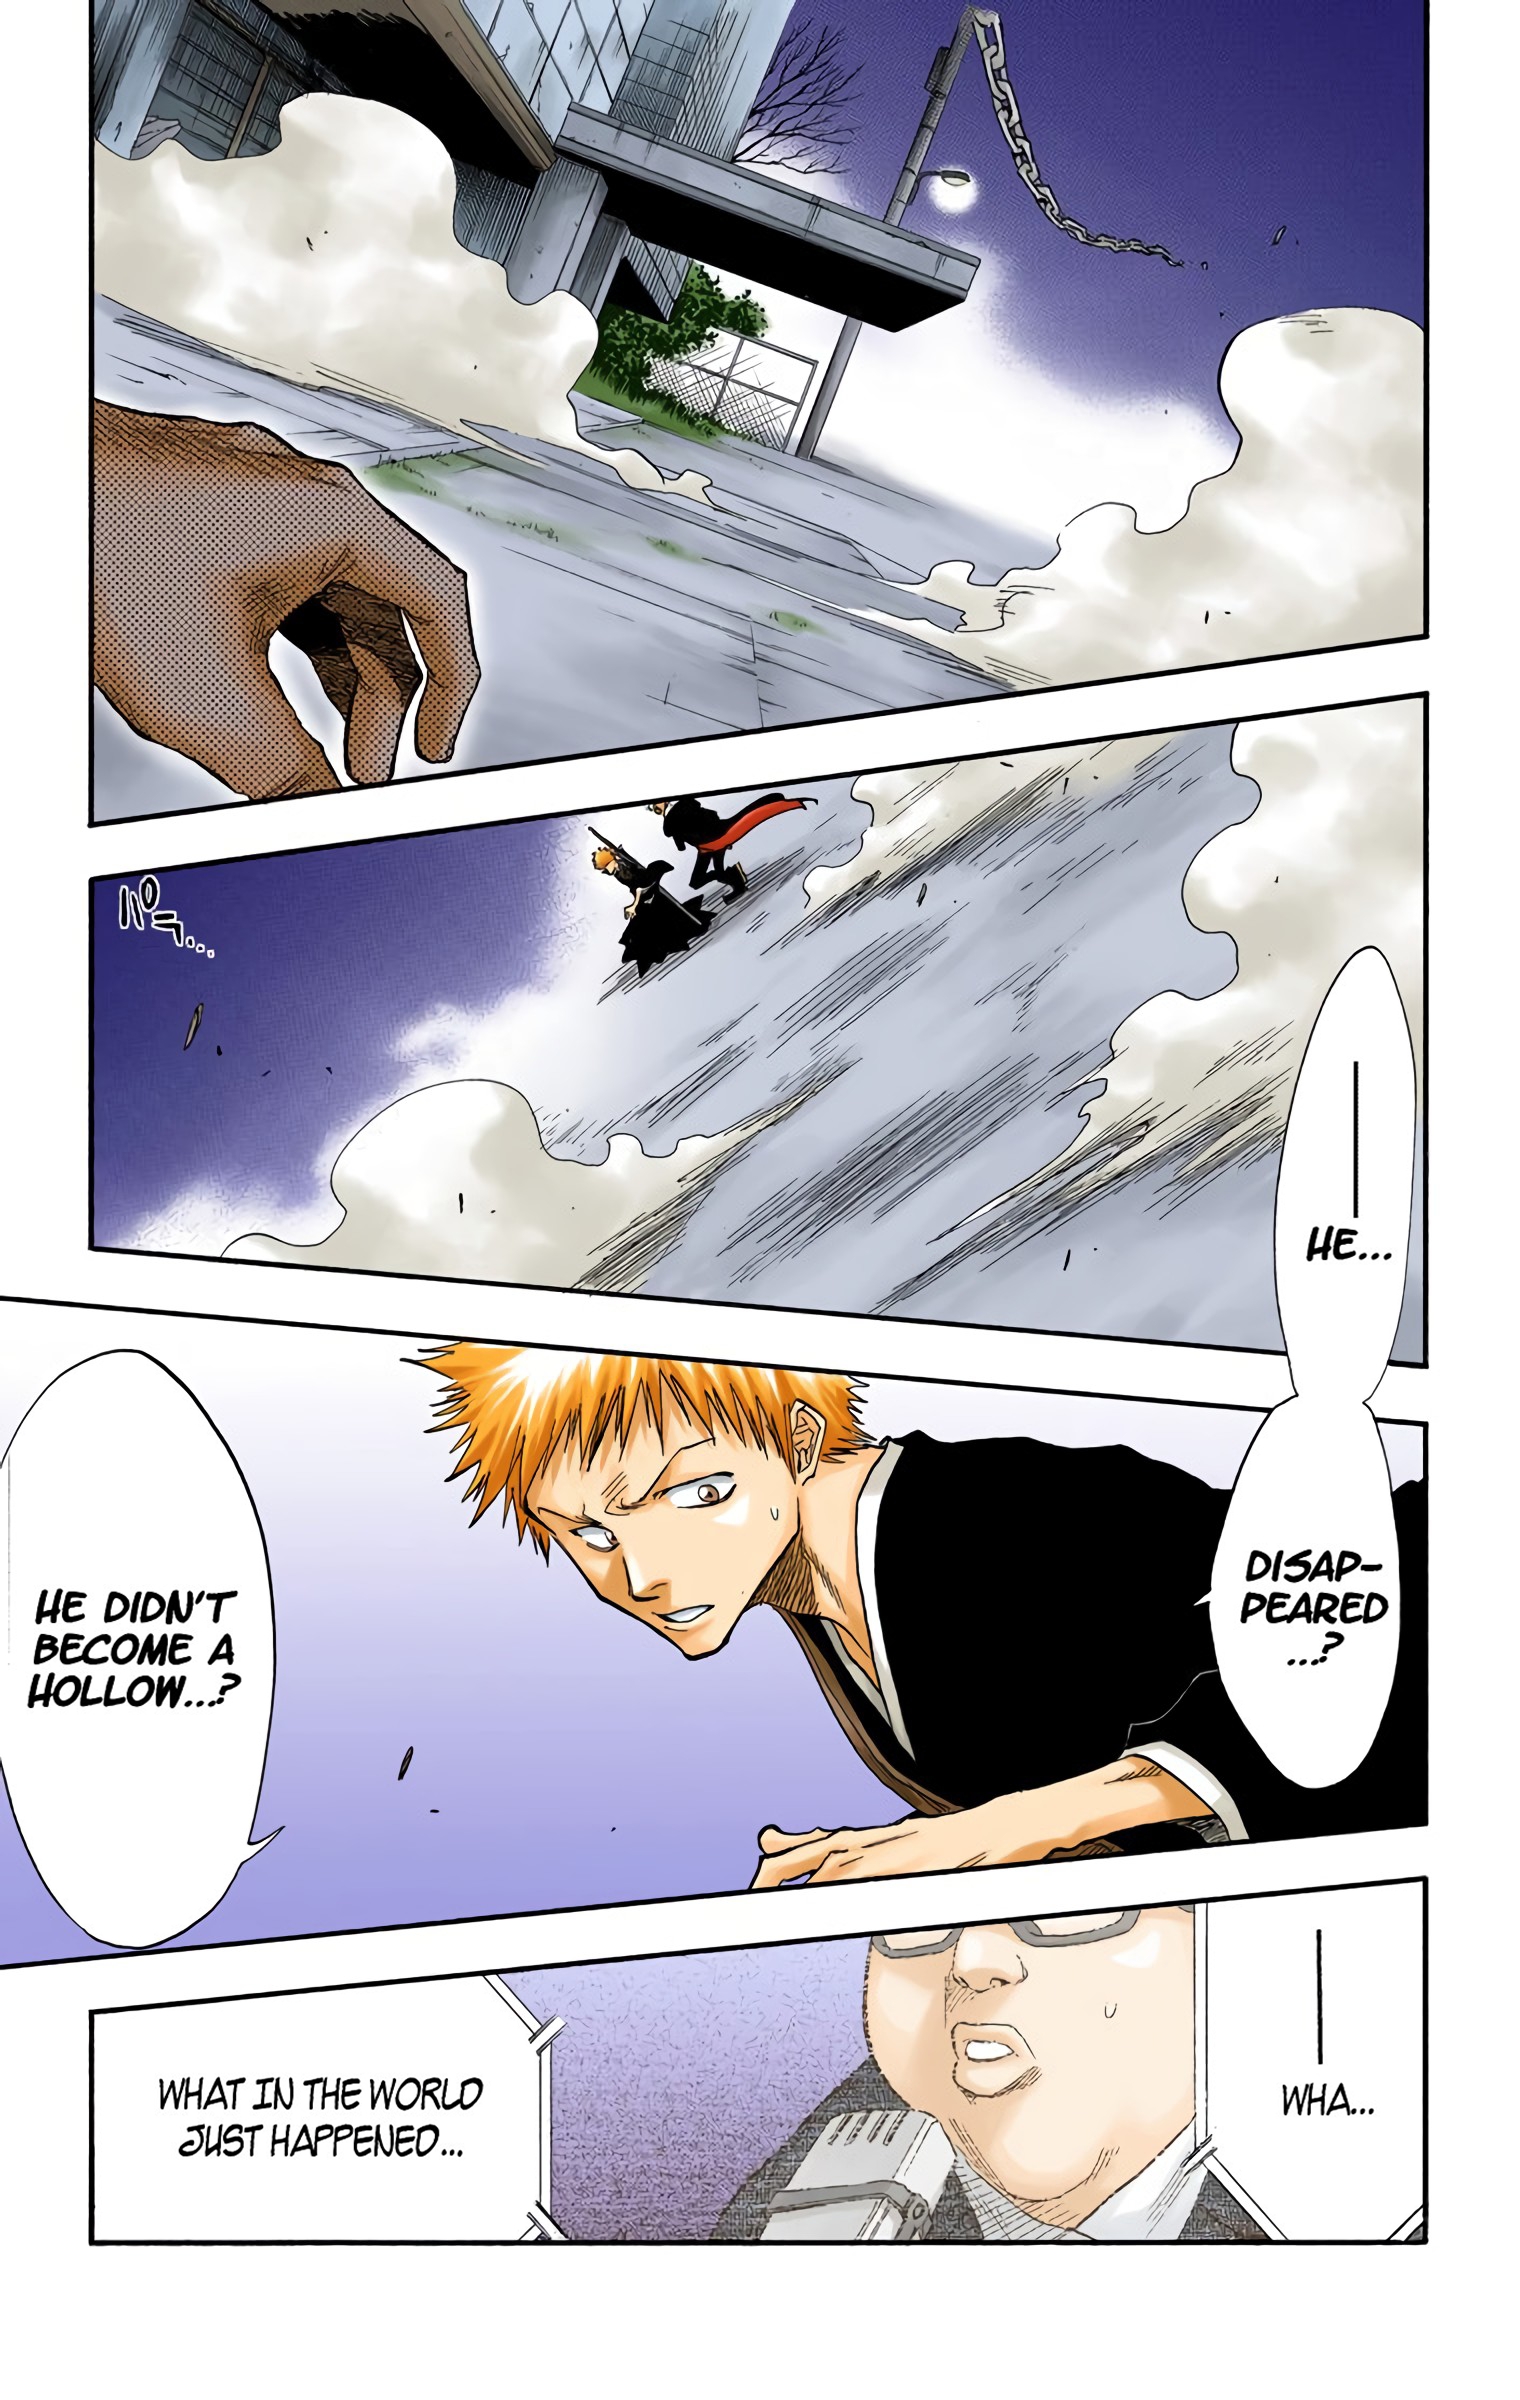 Bleach - Digital Colored Comics Vol.4 Chapter 30: Second Contact (It Was Beyond The Scope Of Our Understanding) - Picture 3